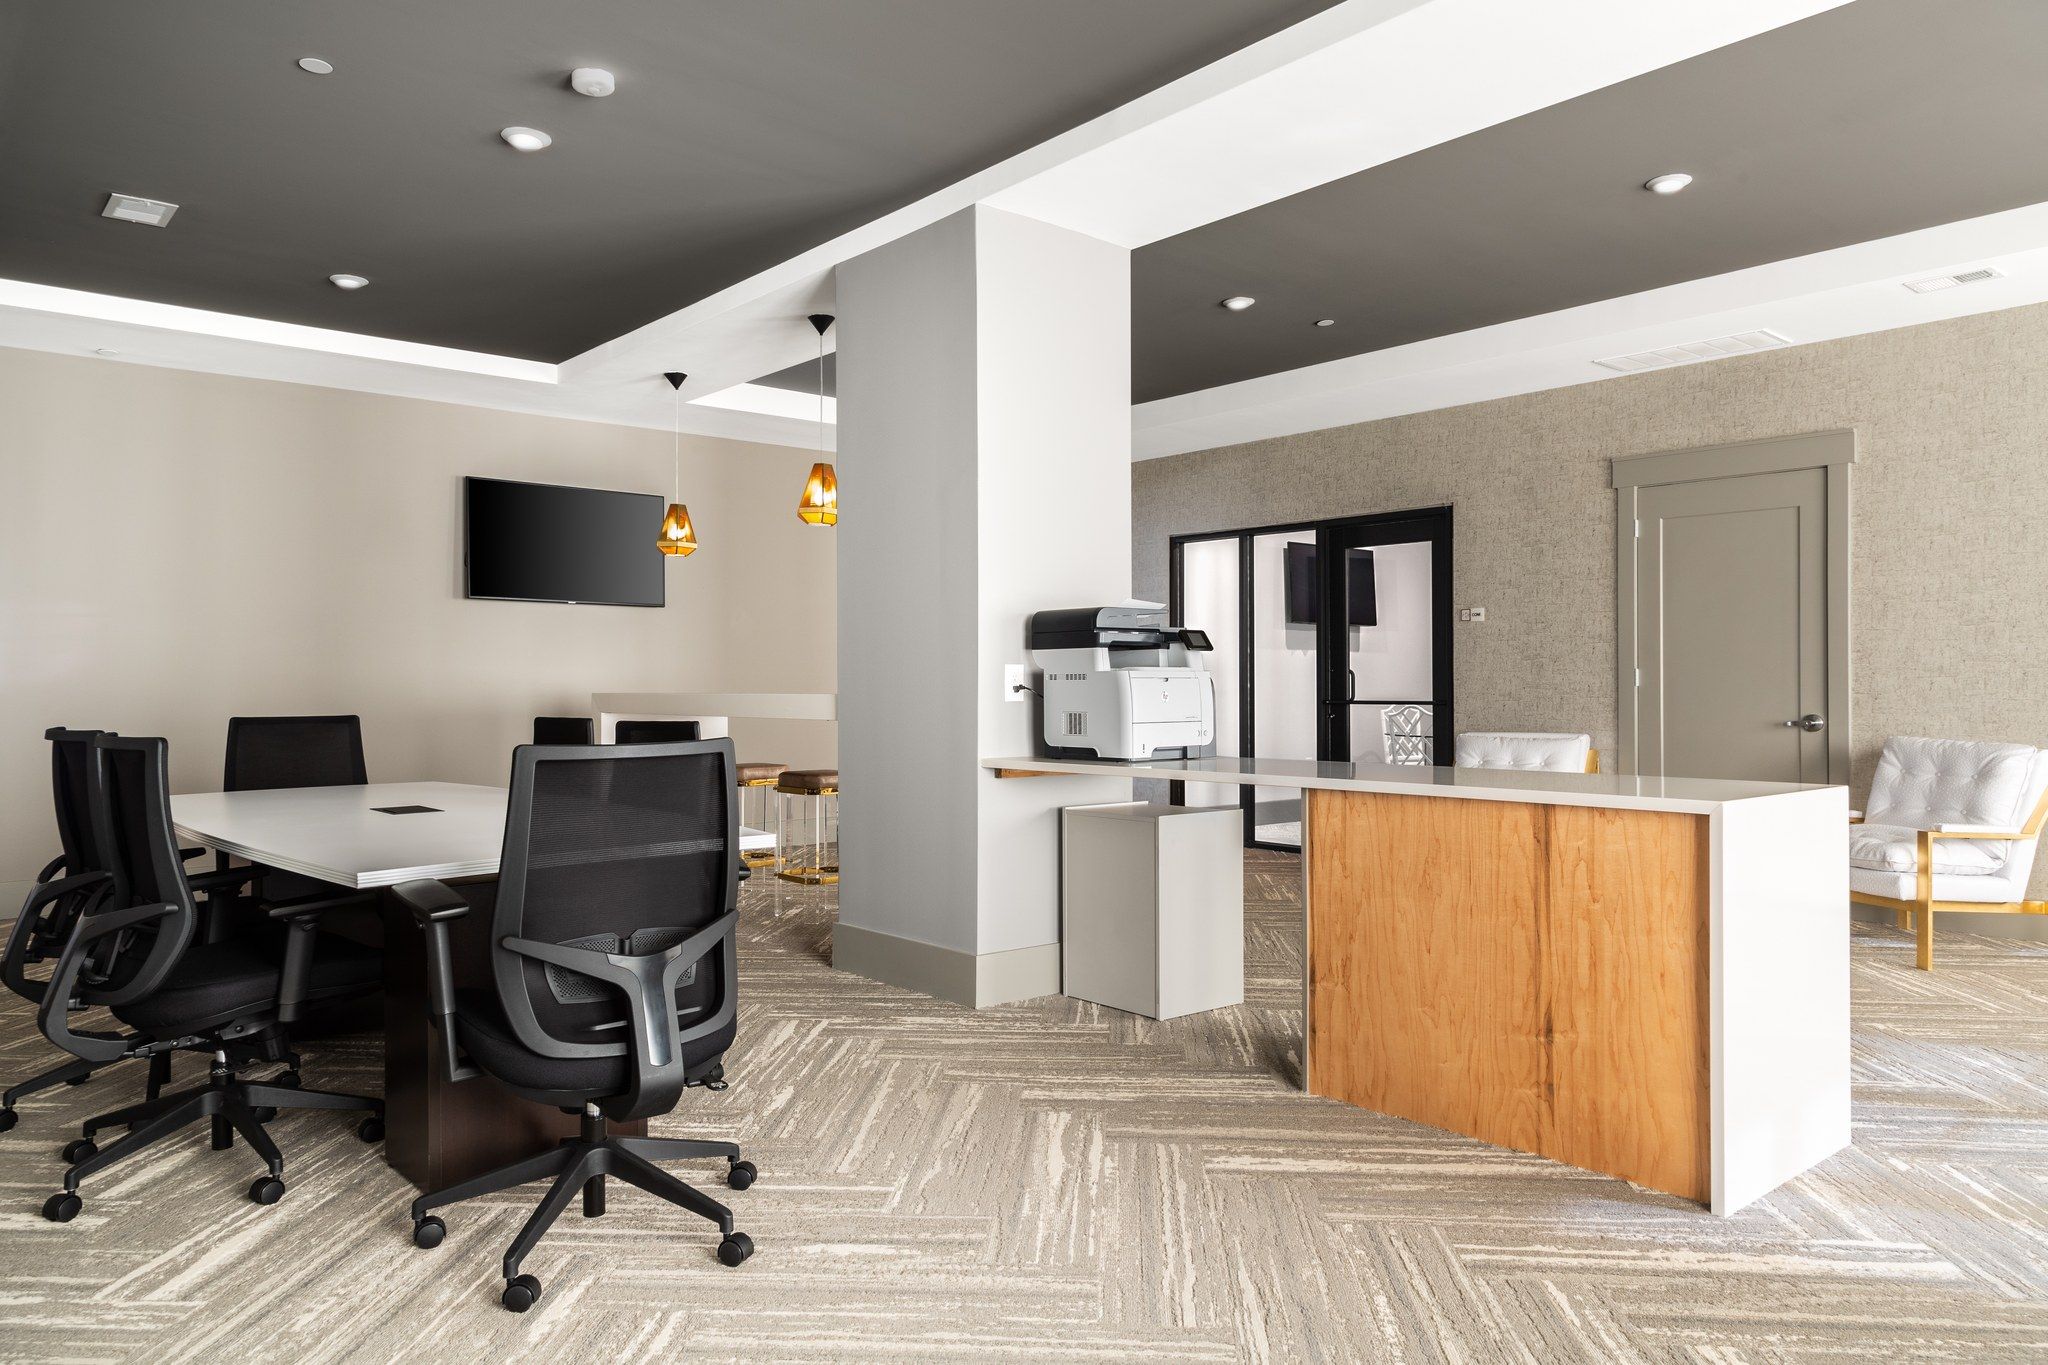 Business hub for residents at Providence Row with printer, conference table, TV, and more seating